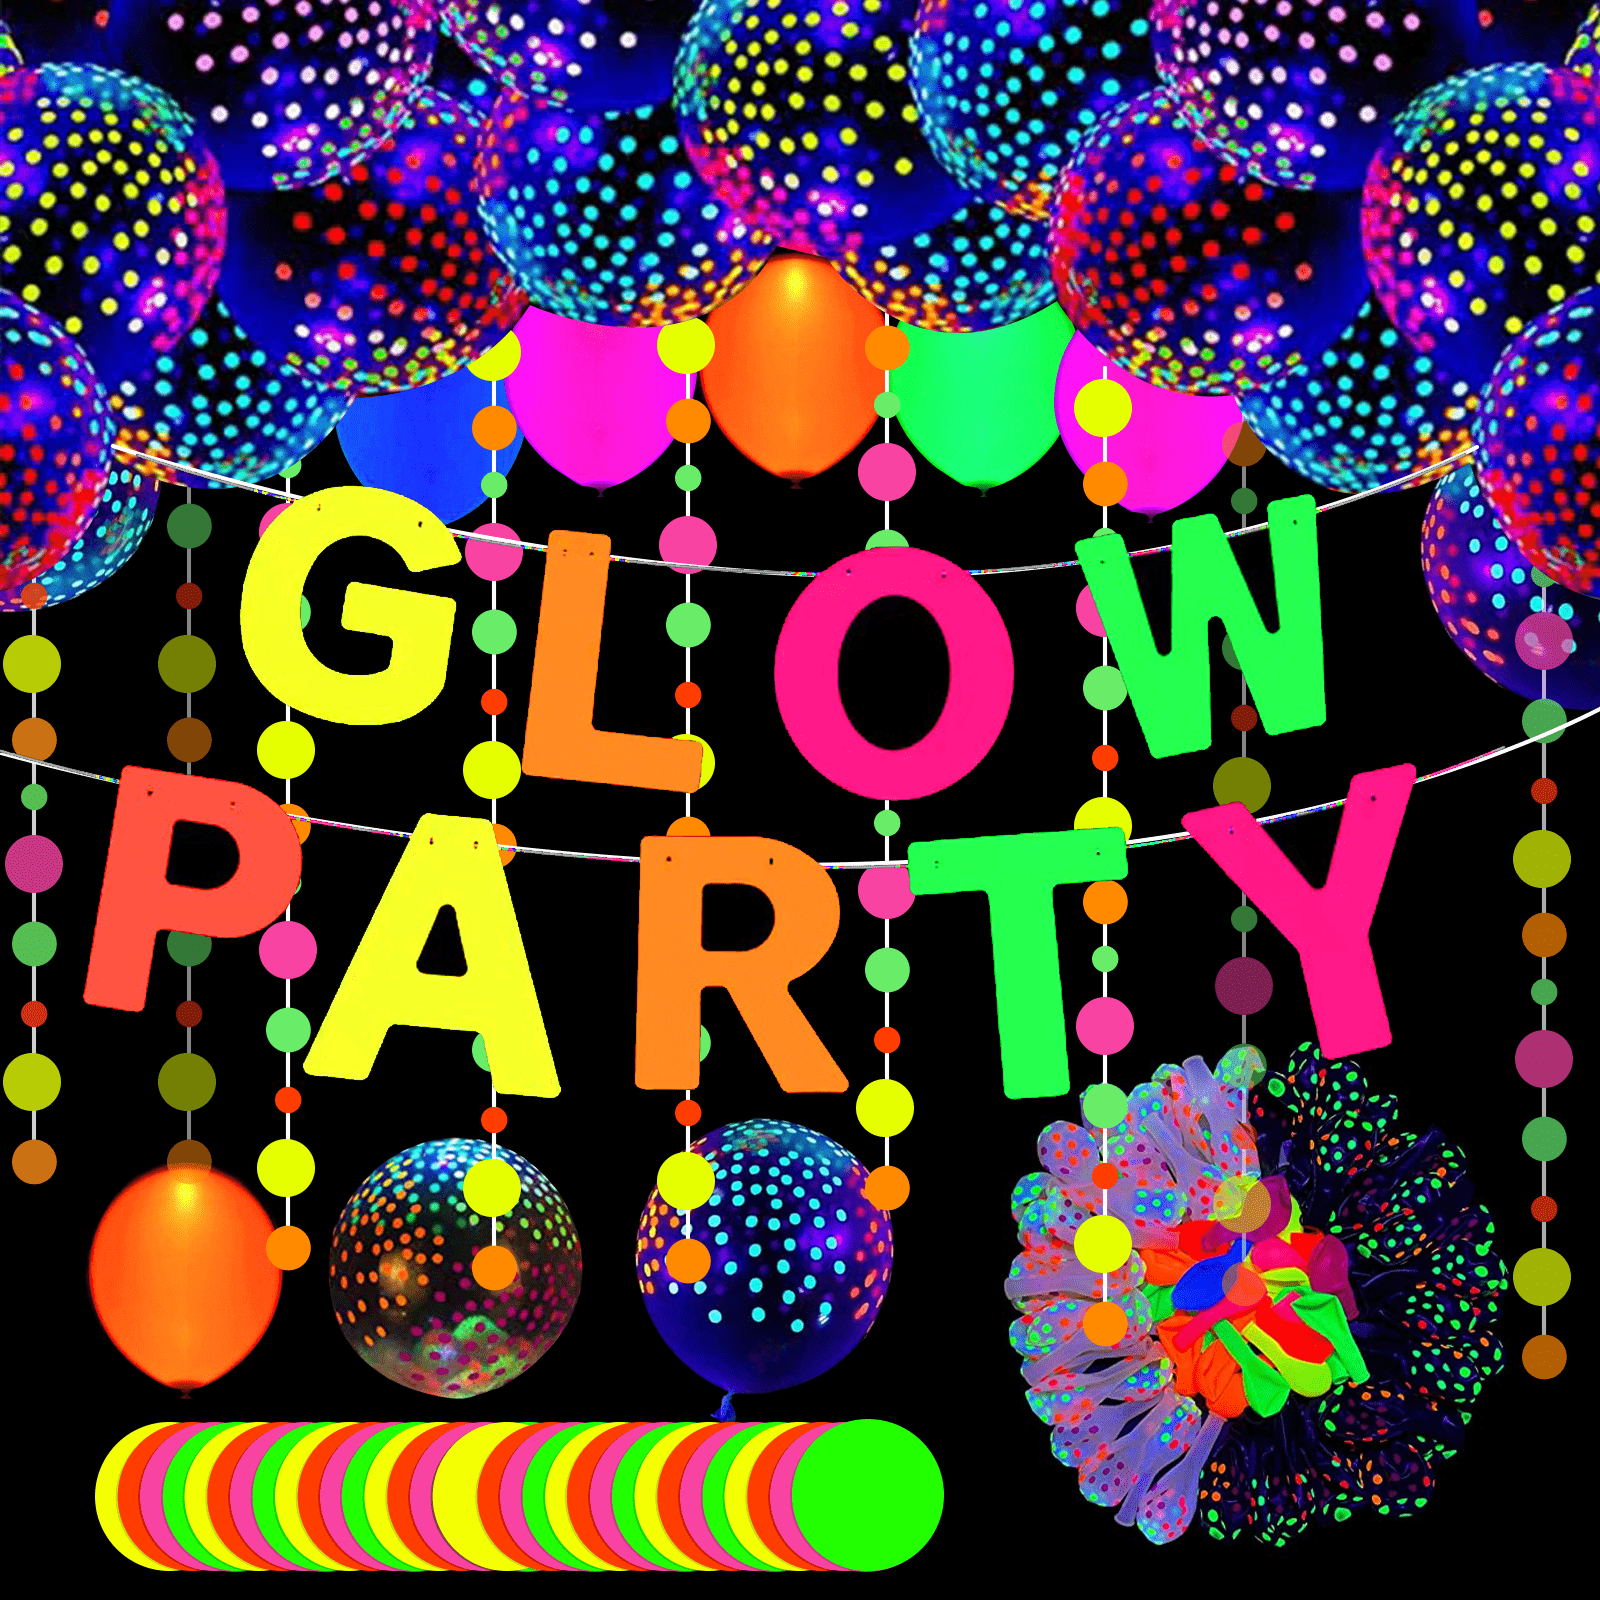 9 Pcs Glow Party Birthday Centerpieces Neon Birthday Decorations Honeycomb  Neon Glow Party Supplies Decorations LED Birthday Table Decorations Glow in